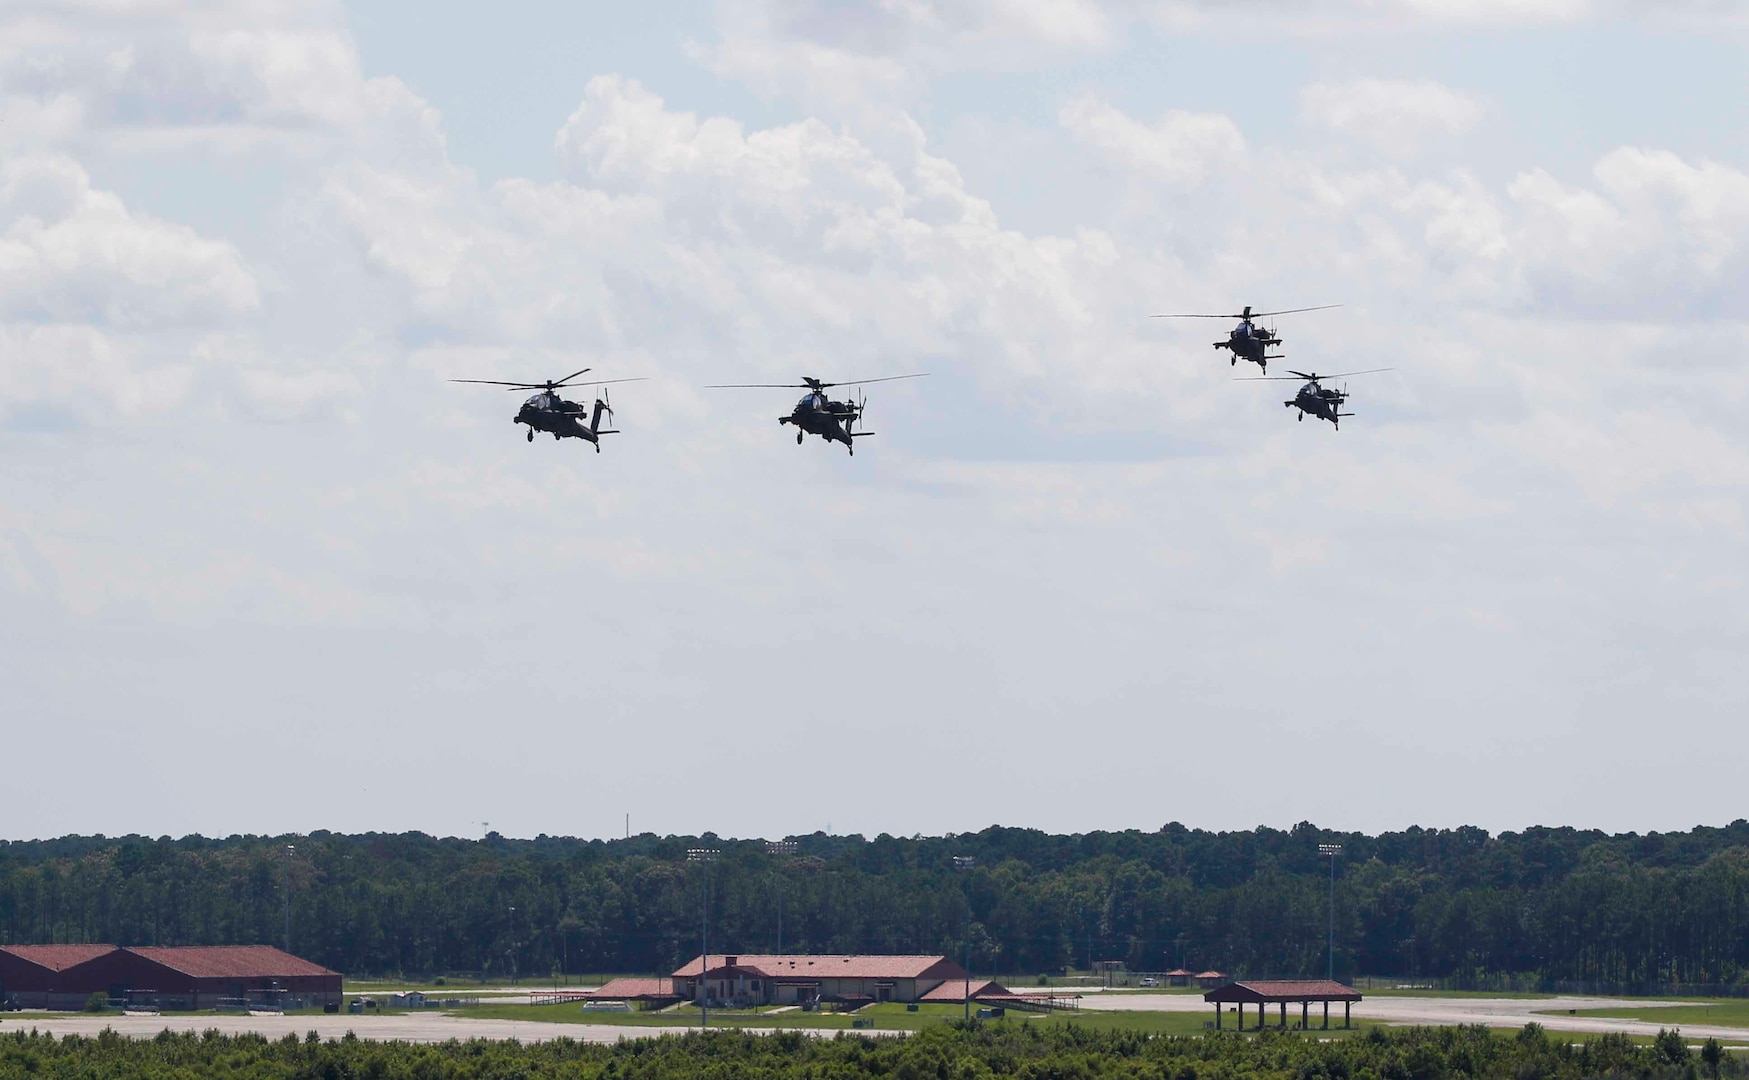 A group of four AH-64E Apache helicopters arrive at Hunter Army Airfield, Georgia after a four-day journey on July 16, 2021. (U.S. Army photo by Sgt. Savannah Roy)